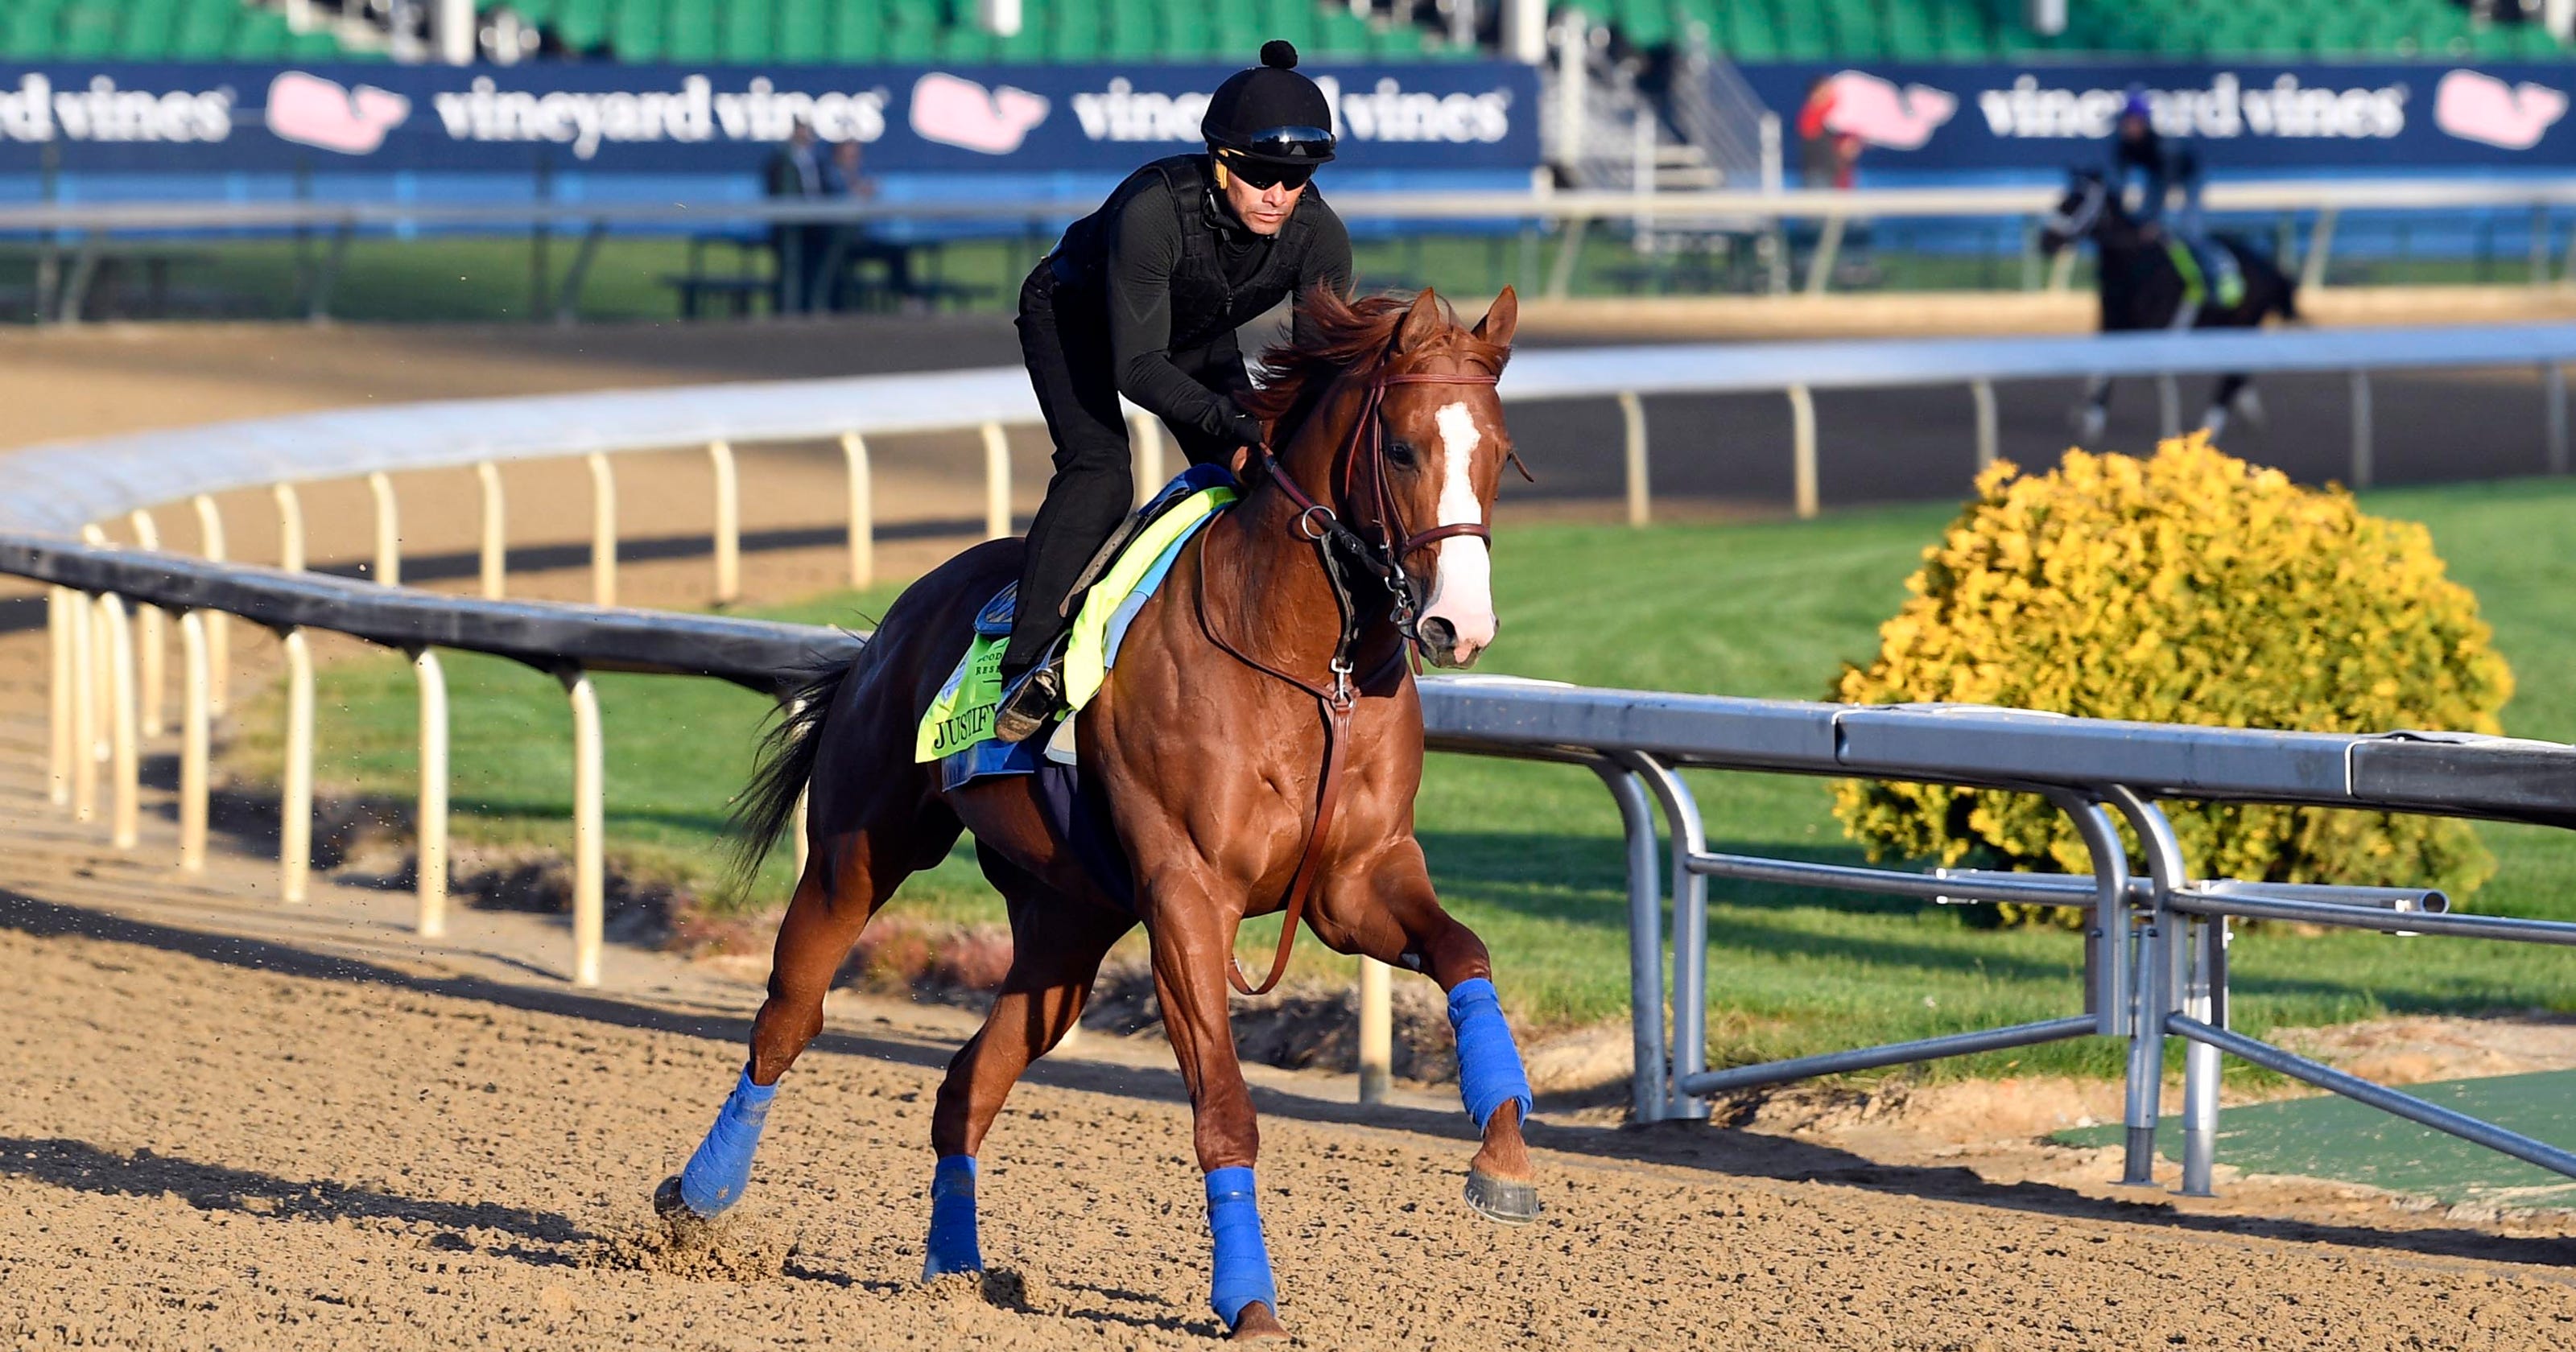 Kentucky Derby: Here are 20 horses that make up field